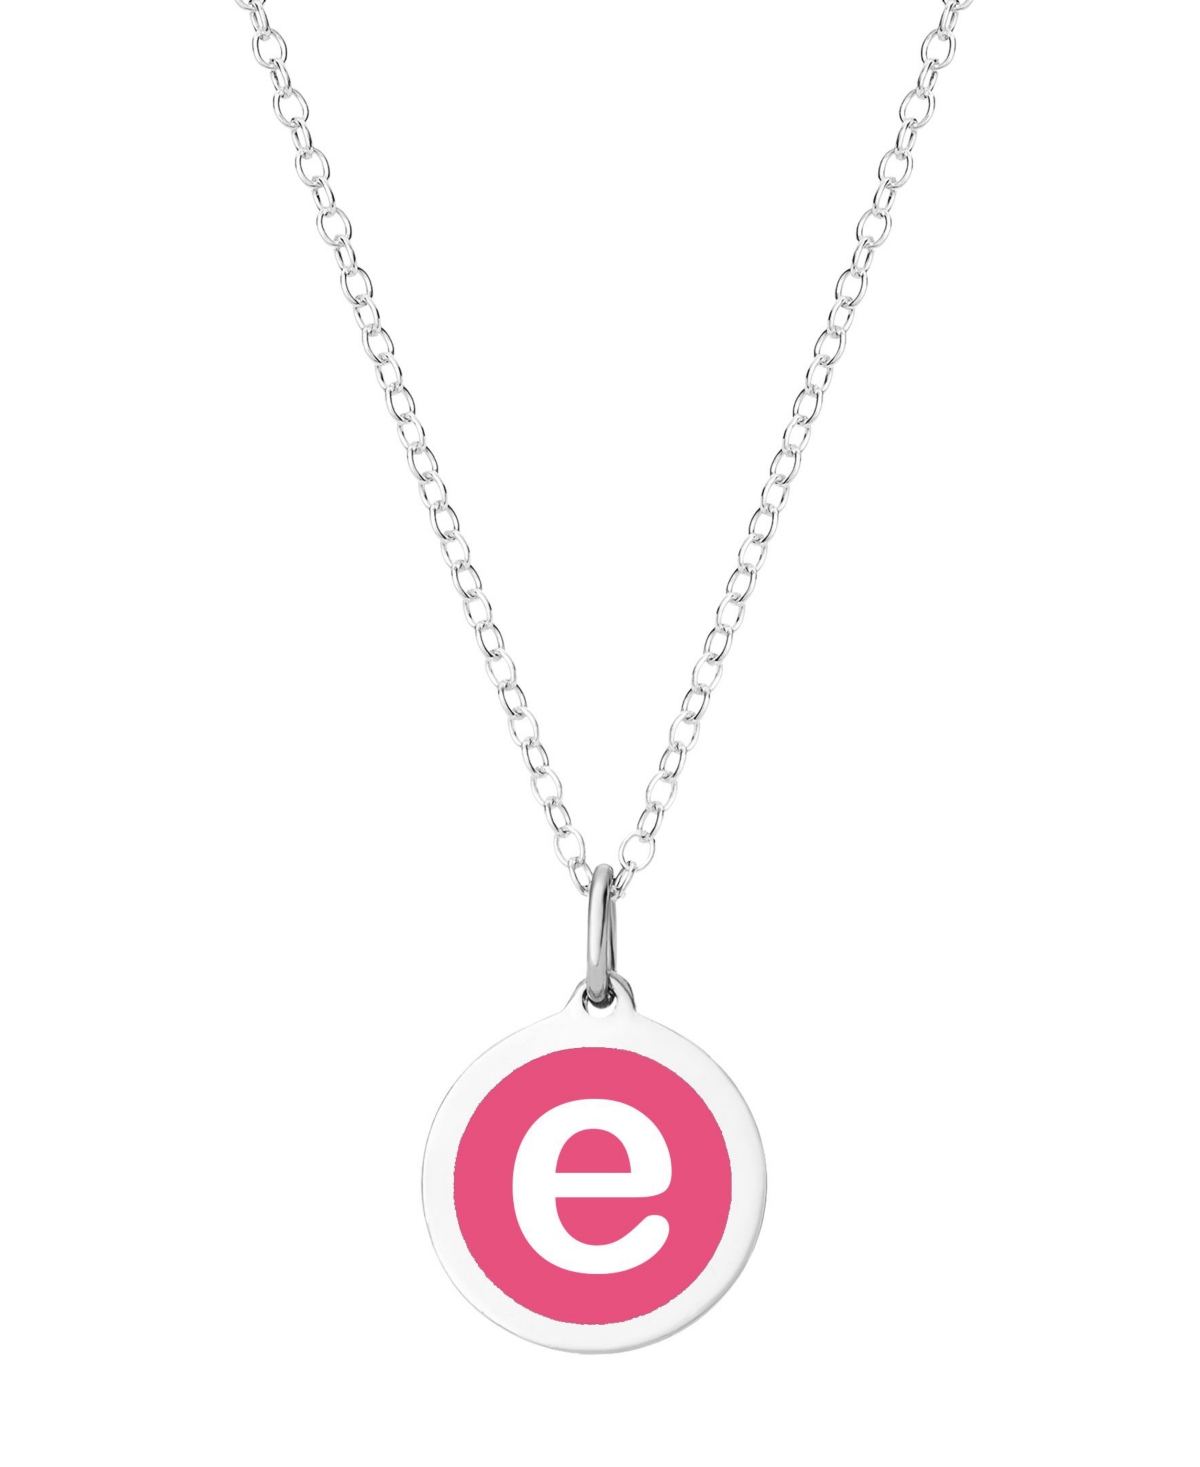 Auburn Jewelry Mini Initial Pendant Necklace in Sterling Silver and Hot Pink Enamel, 16" + 2" Extender